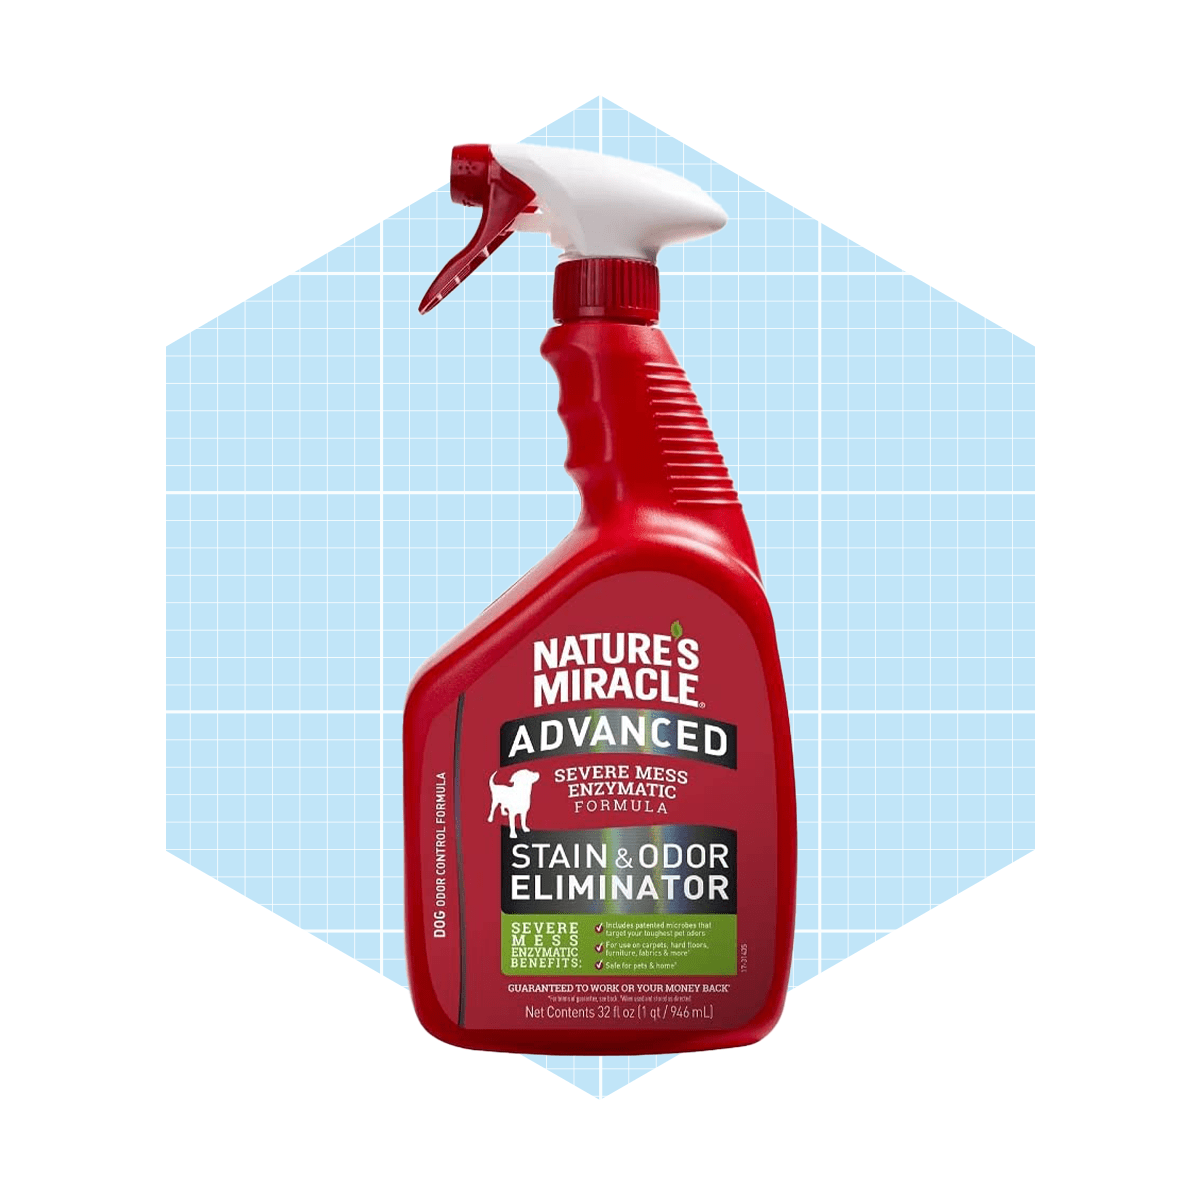 Natures Miracle Advanced Stain And Odor Eliminator Ecomm Via Amazon.com